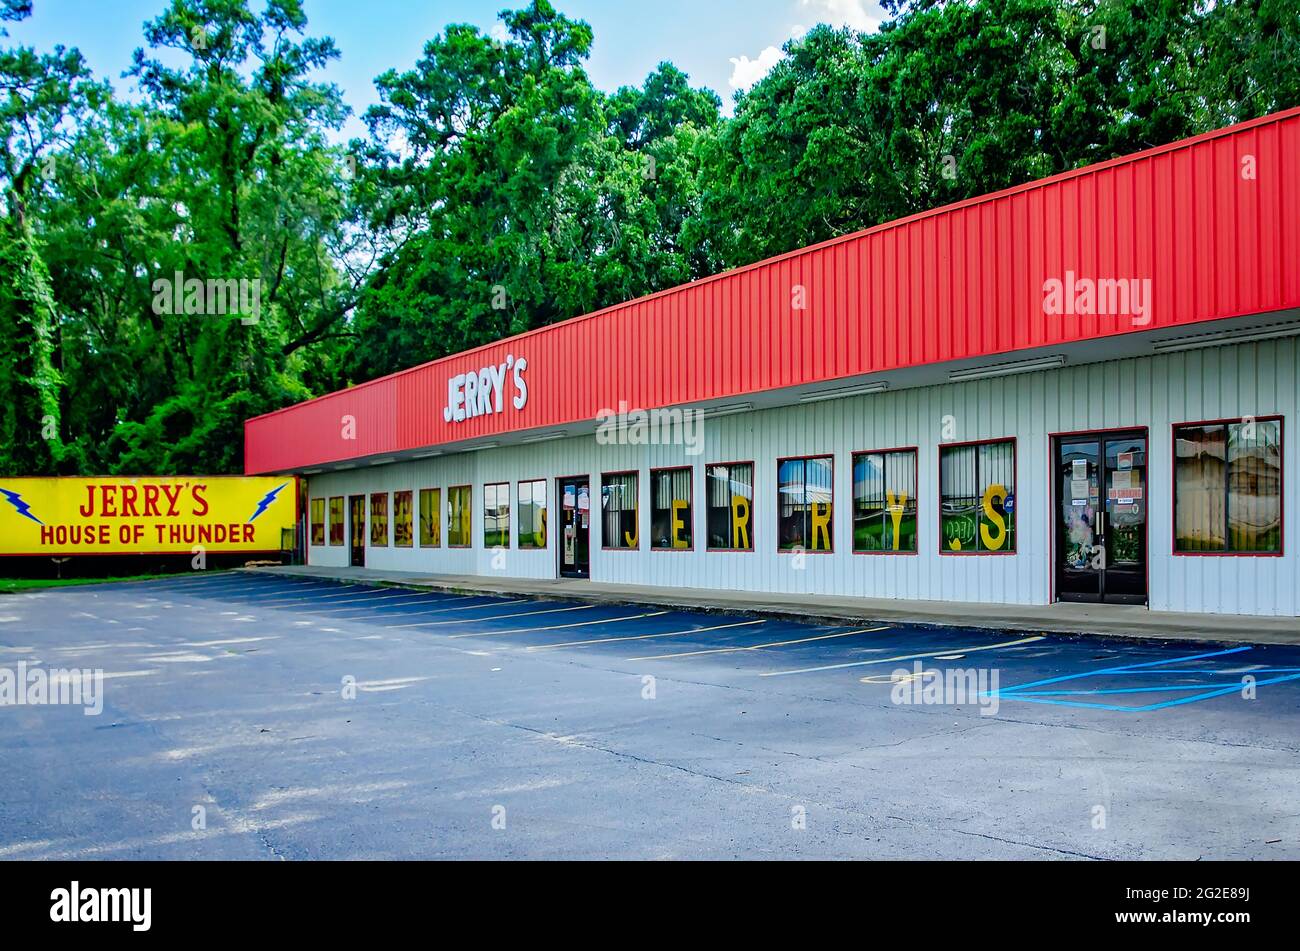 Jerry’s Fireworks is pictured, June 9, 2021, in Theodore, Alabama. Roadside fireworks stands are a popular sight in the American South. Stock Photo